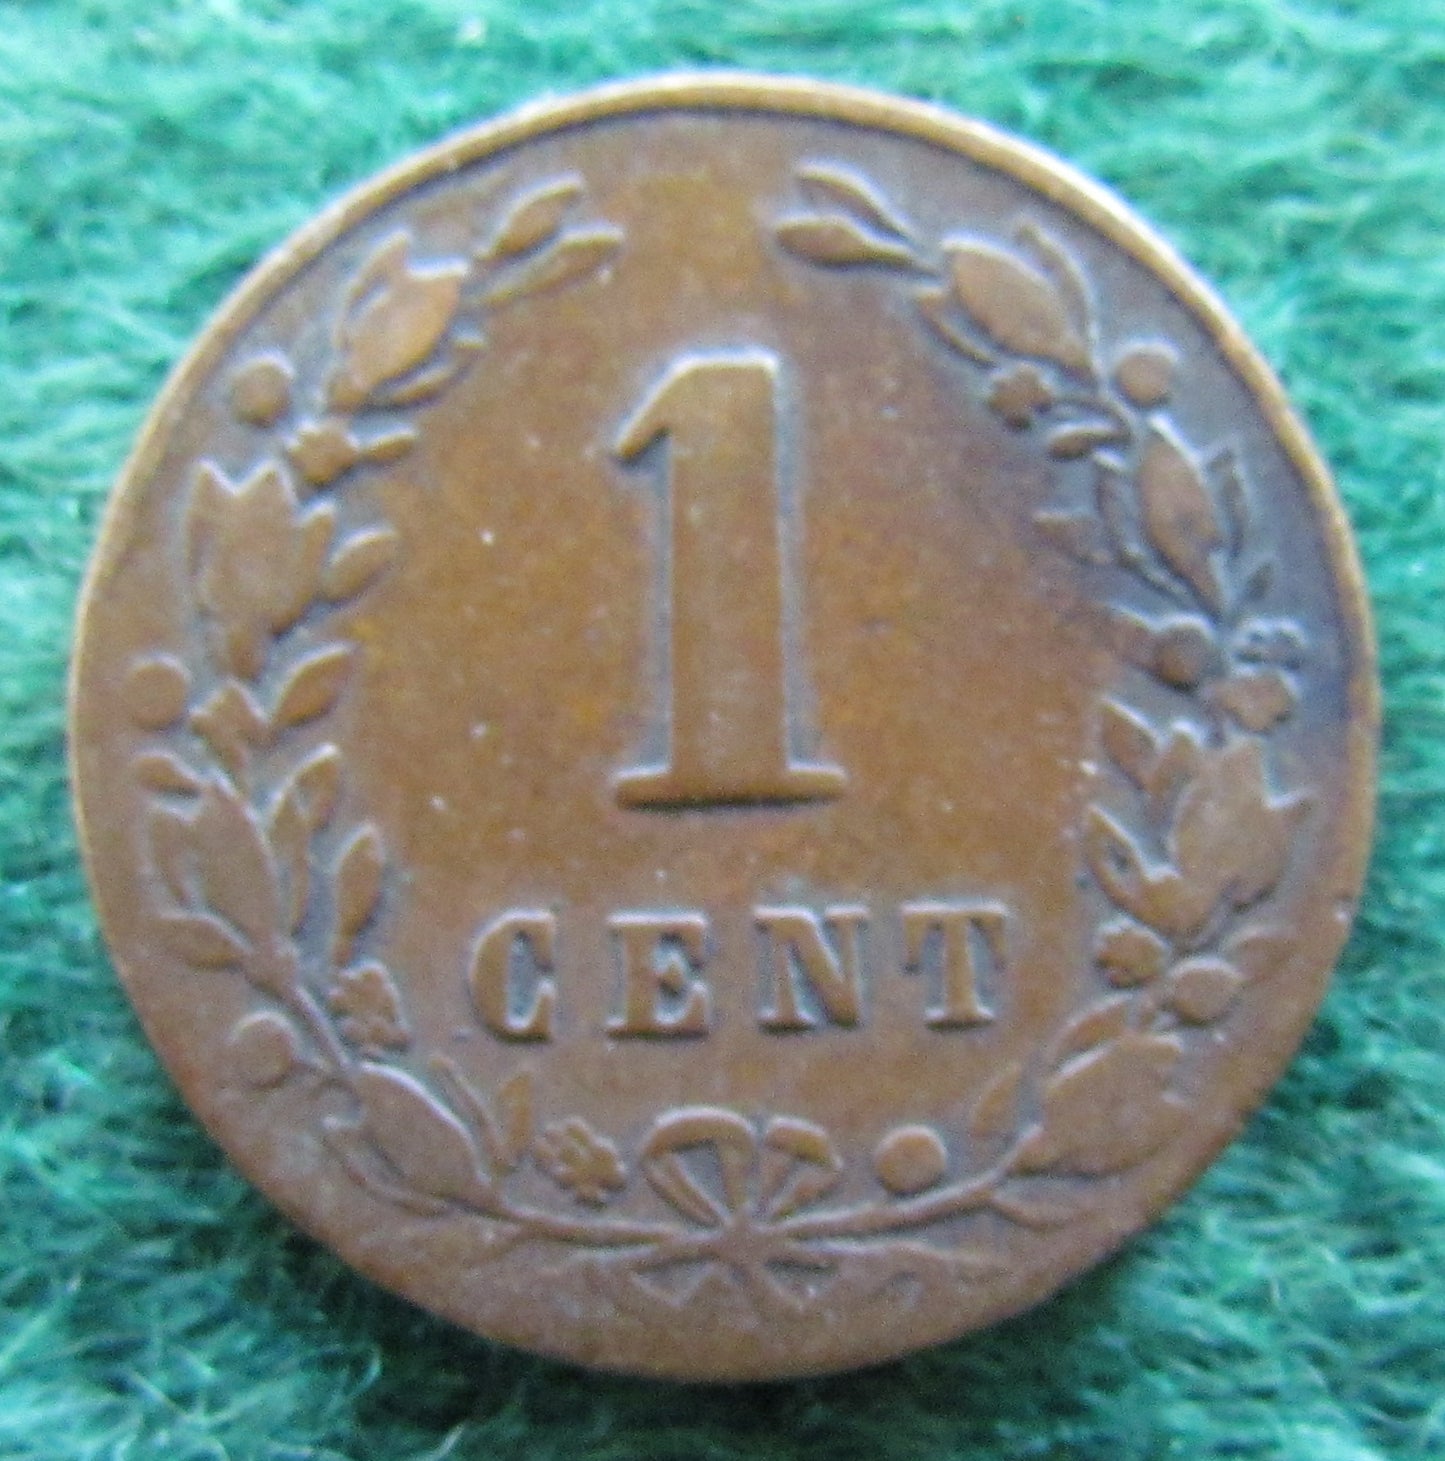 Netherlands 1880 1 Cent Coin - Circulated